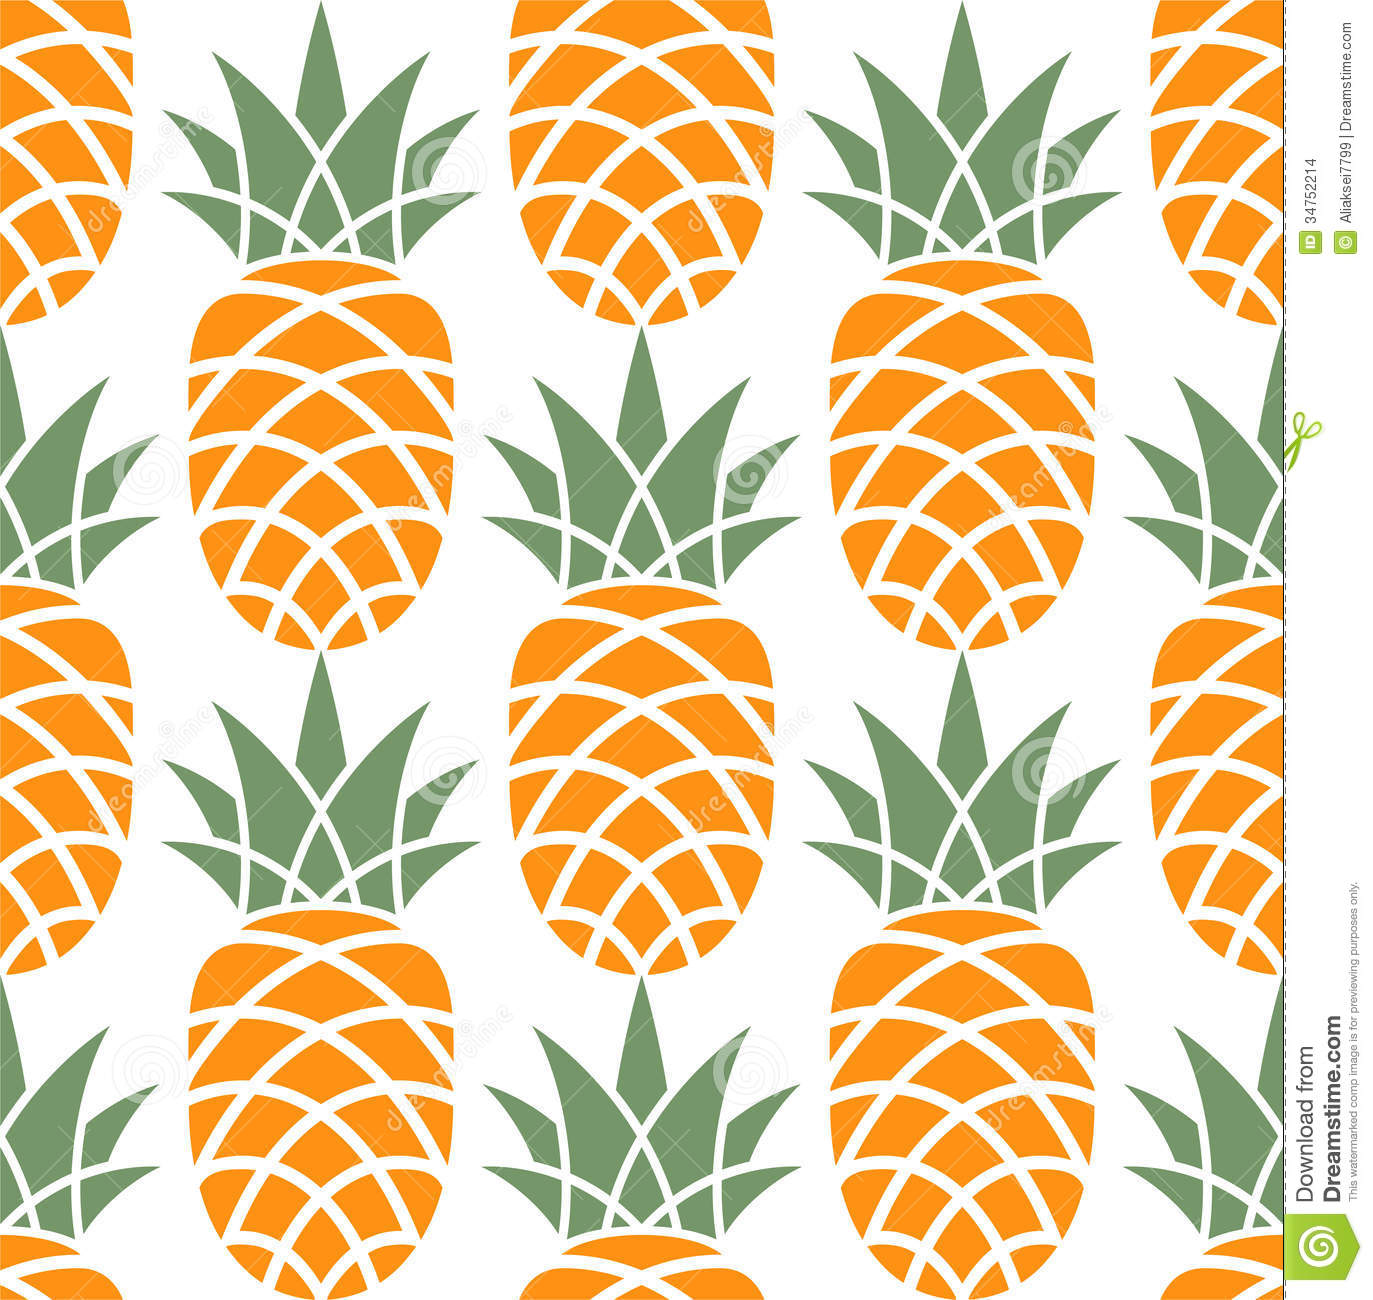 Pineapple Pattern Background Pineapples background